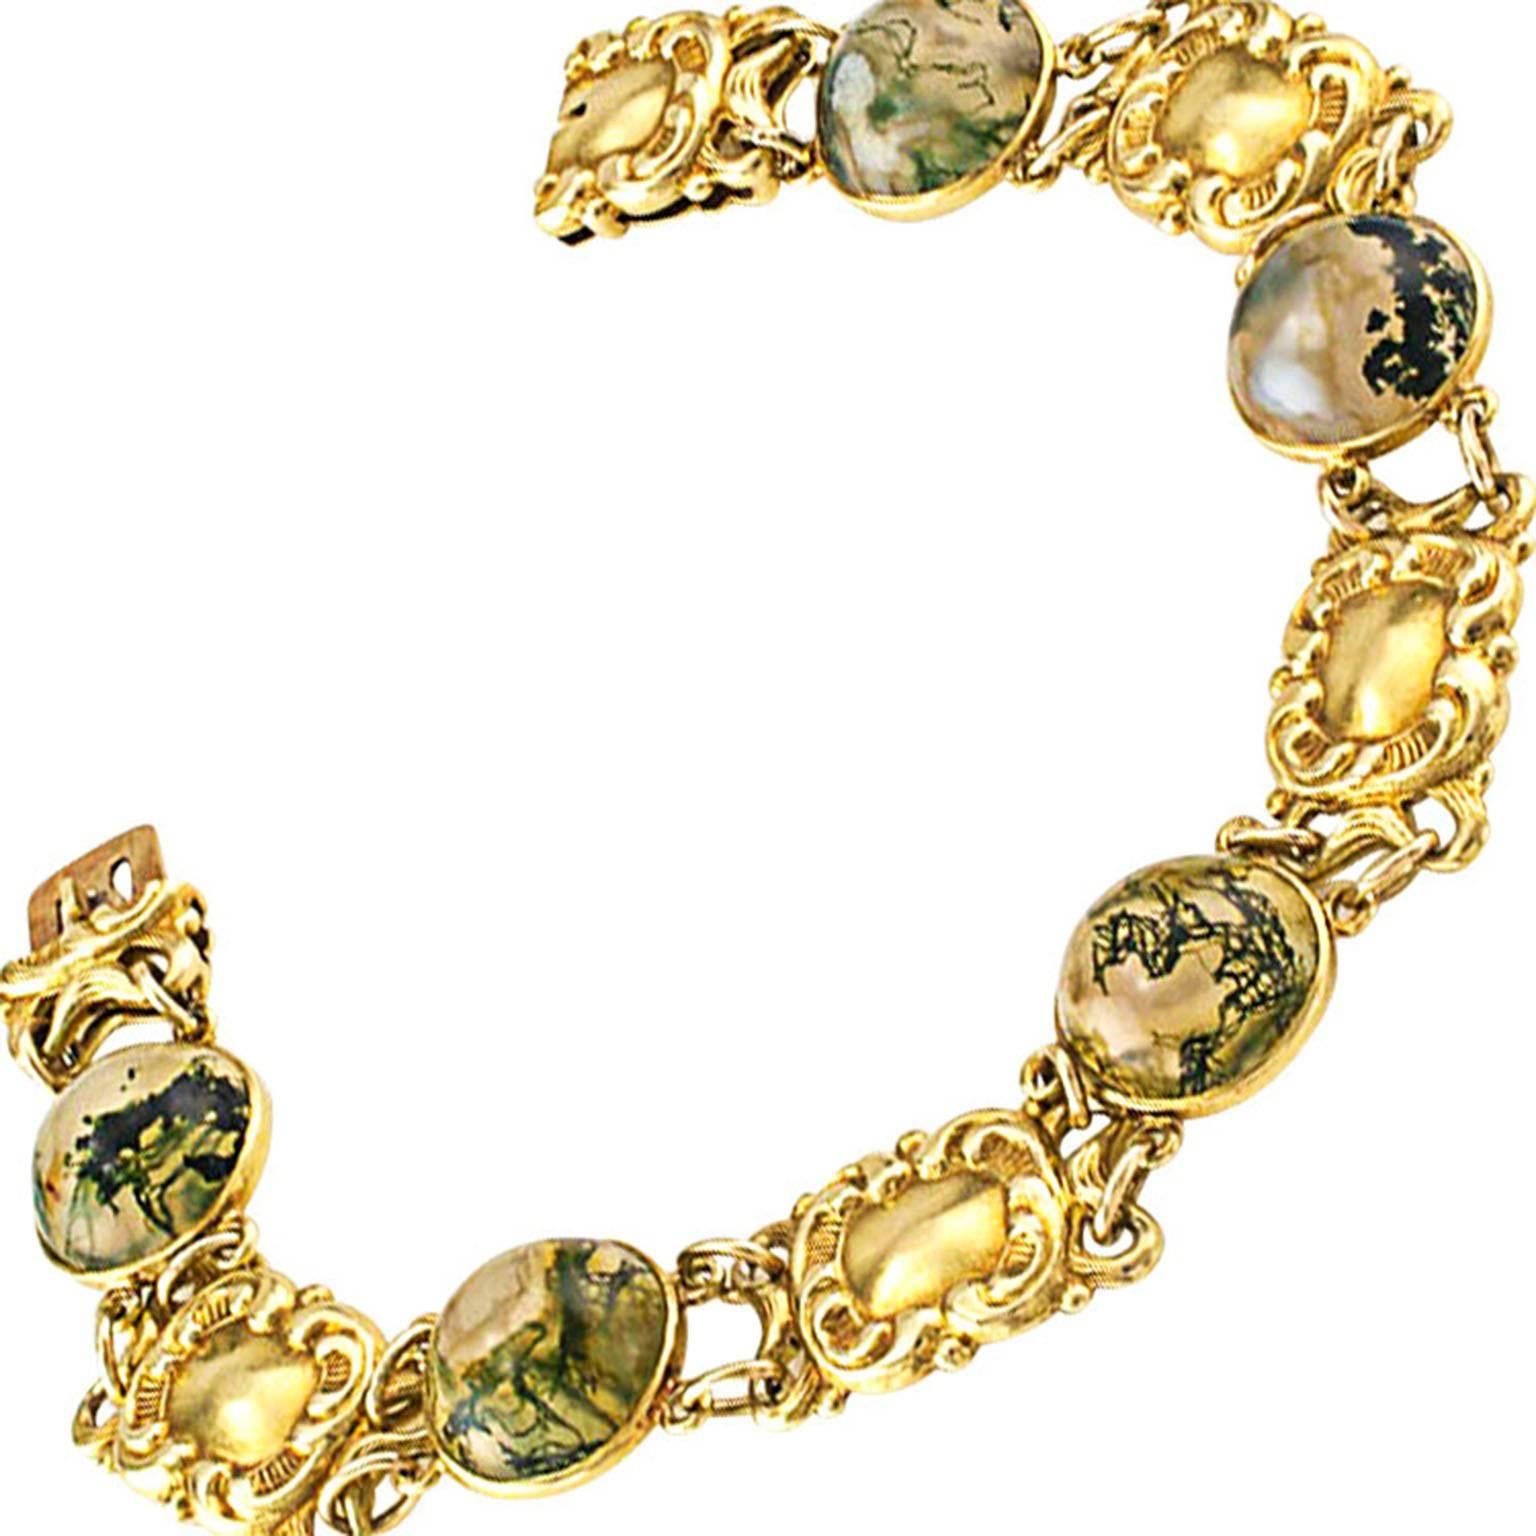 Art Nouveau Moss Agate and Gold Bracelet Circa 1905

Each moss agate stone is a world onto itself, a delightfull feast for the eyes as they are seduced by the intricacies and perplexing shapes that appear to be dissolved into the soft glow of the